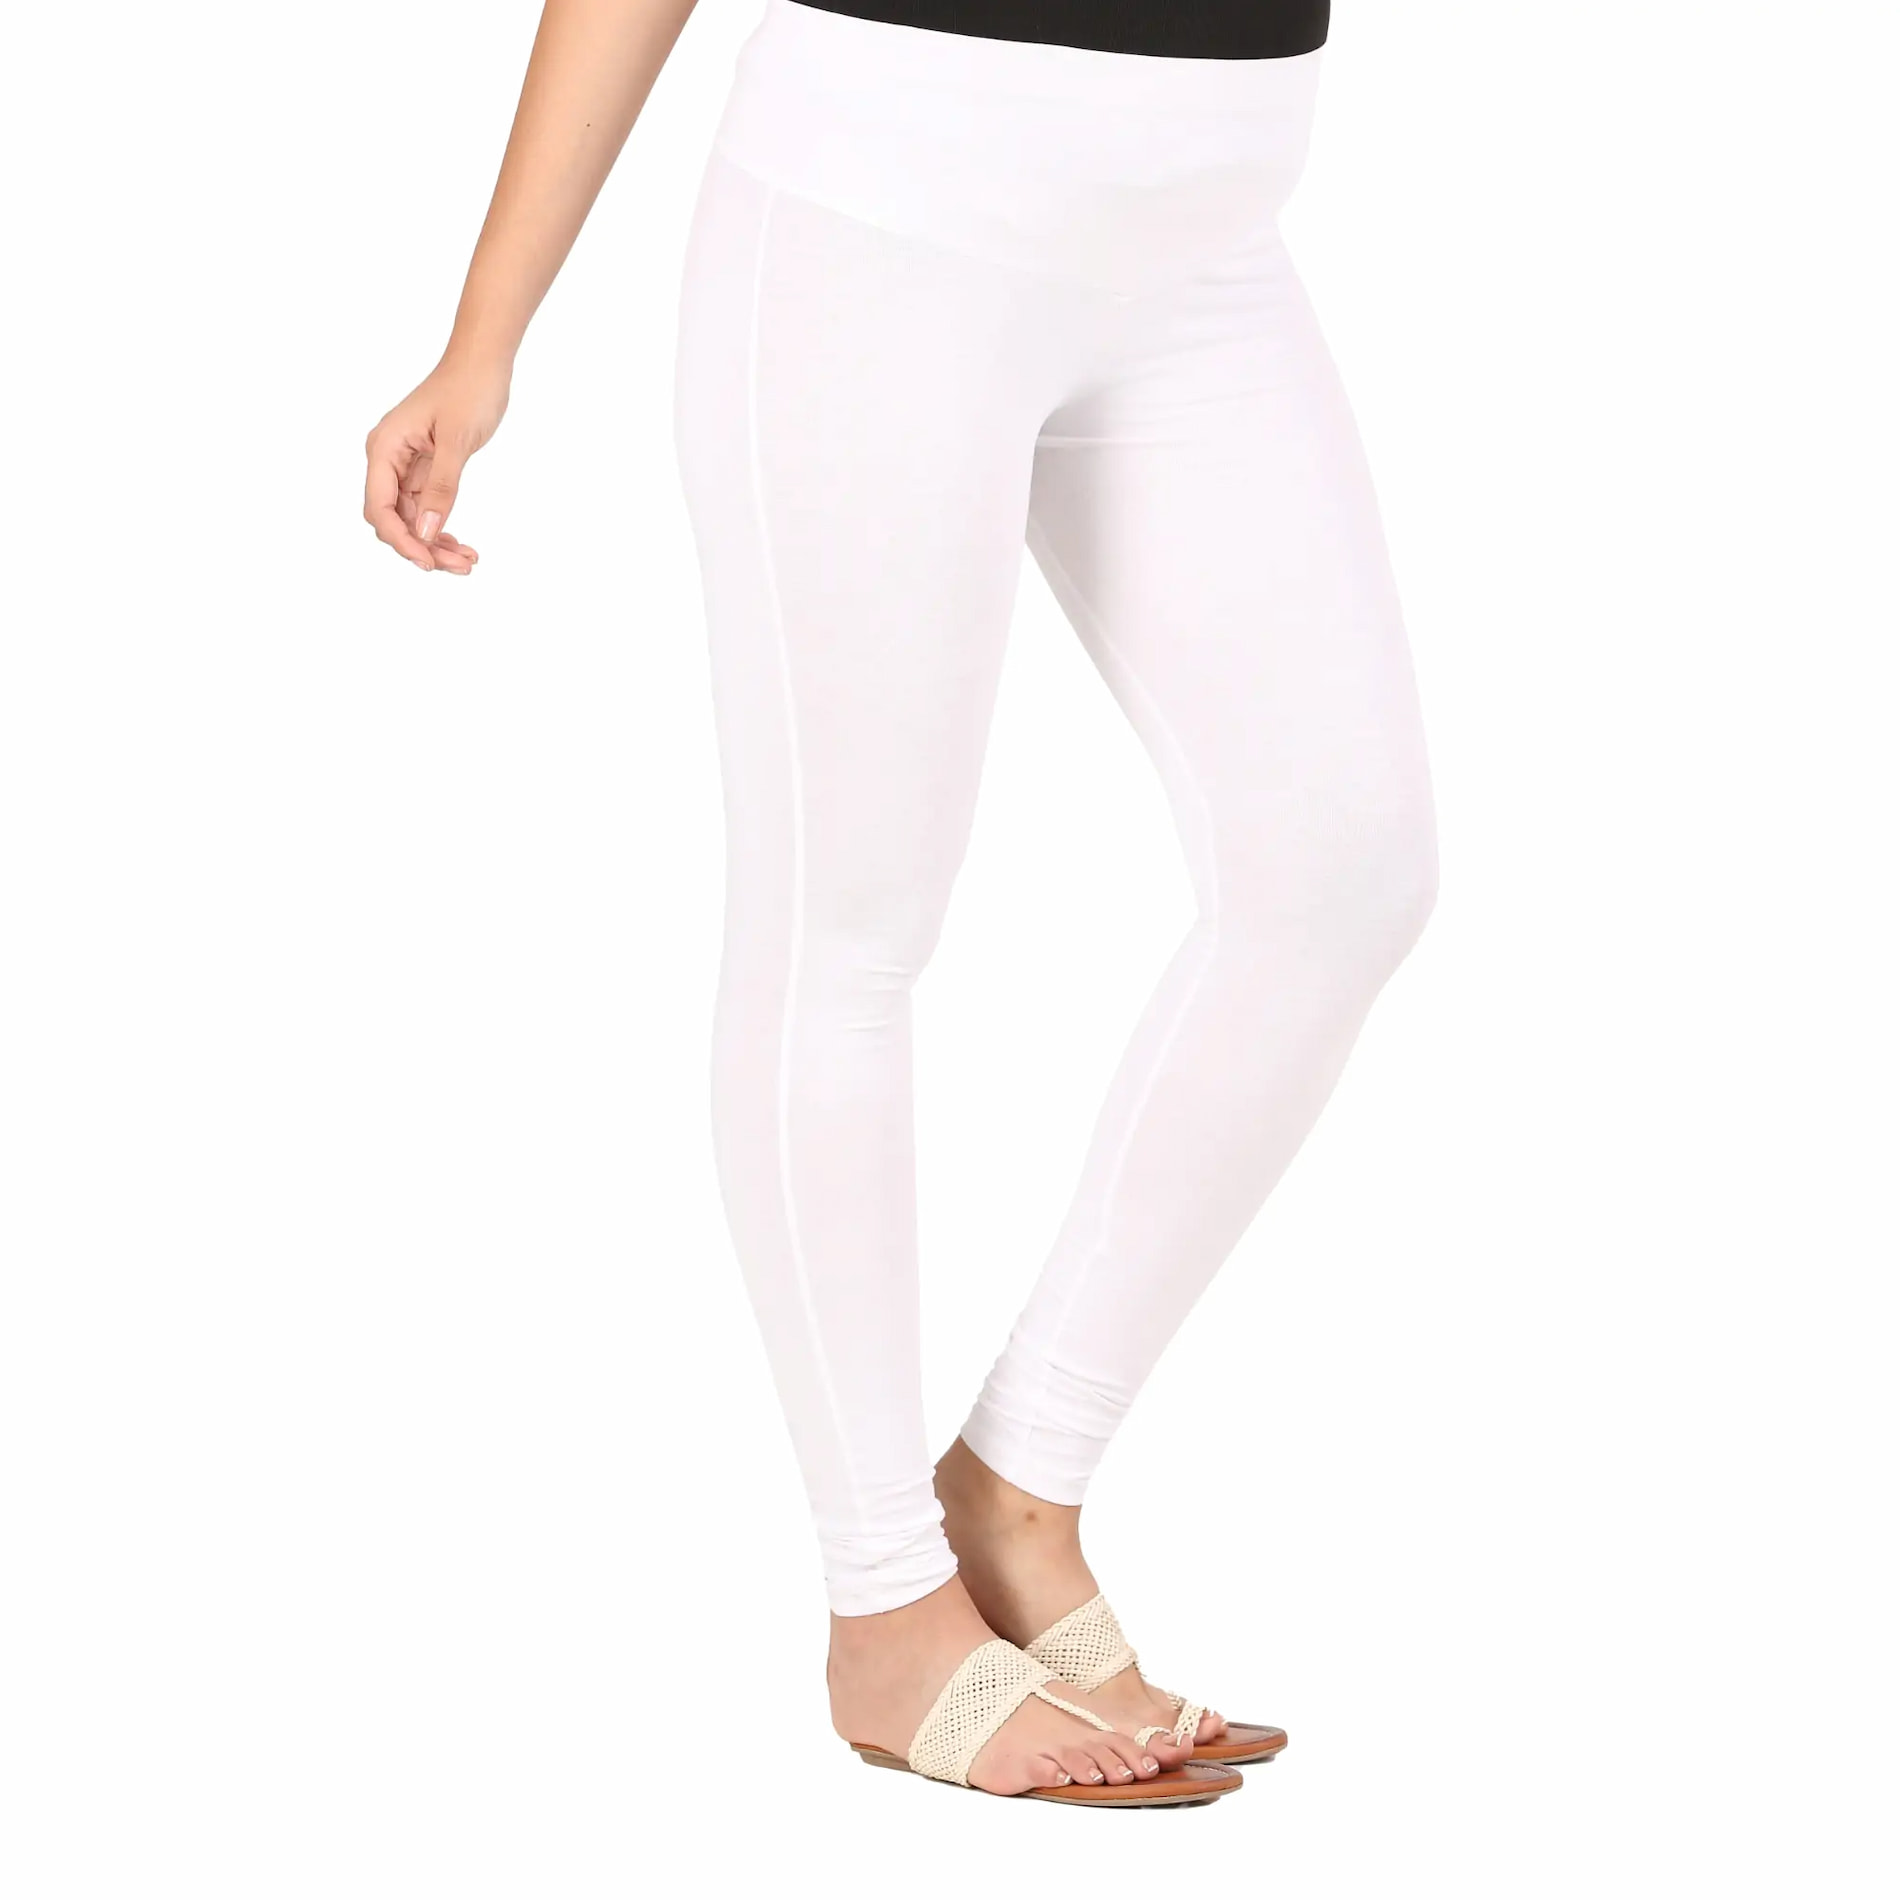 Stretchable Pregnancy & Post Delivery Leggings - White (L)